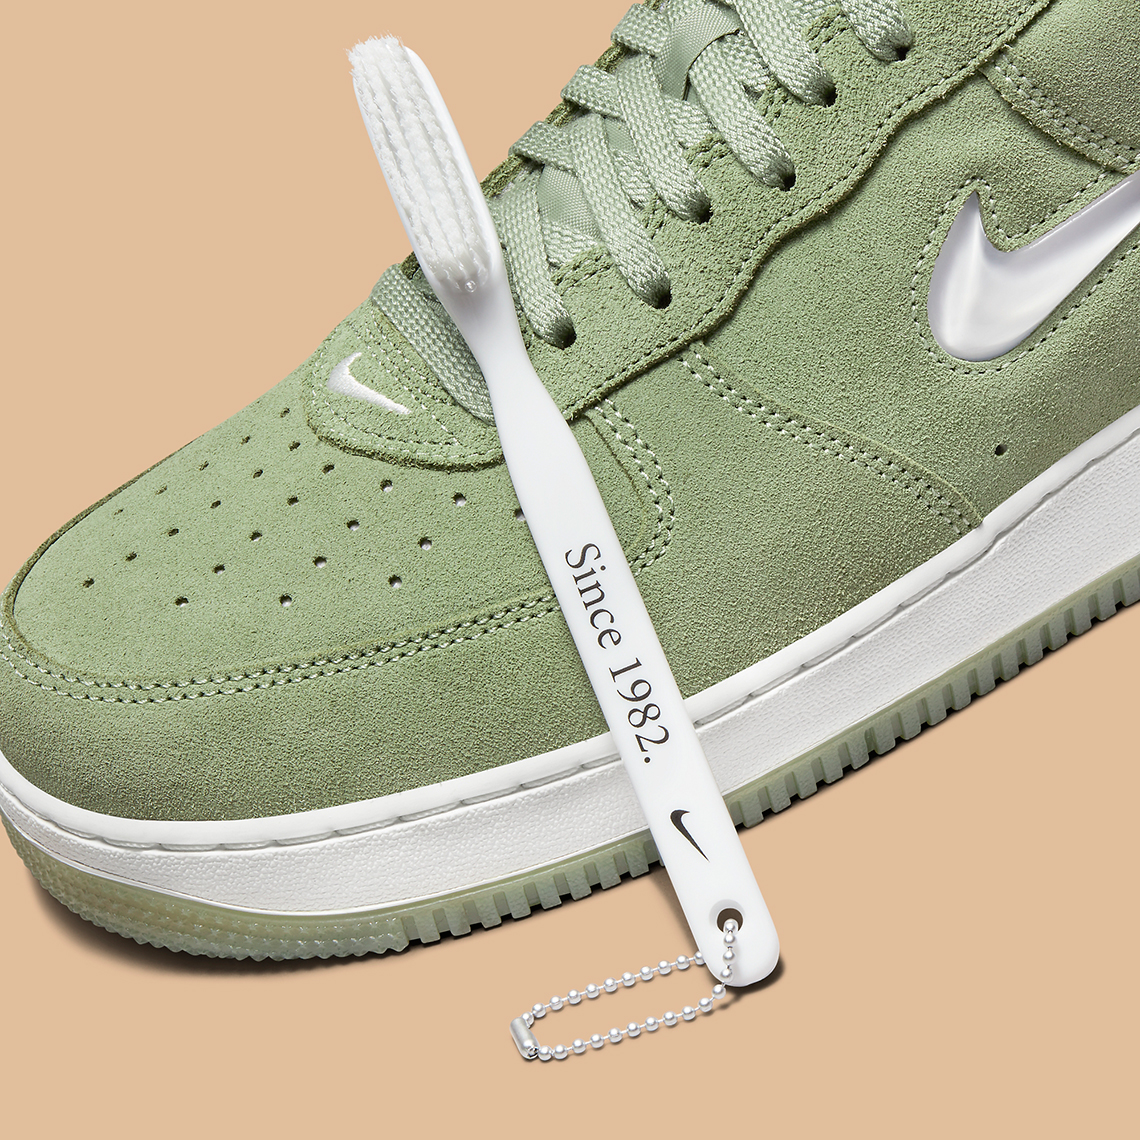 NIKE AIR FORCE 1 '07 LV8 SUEDE GREEN price $102.50